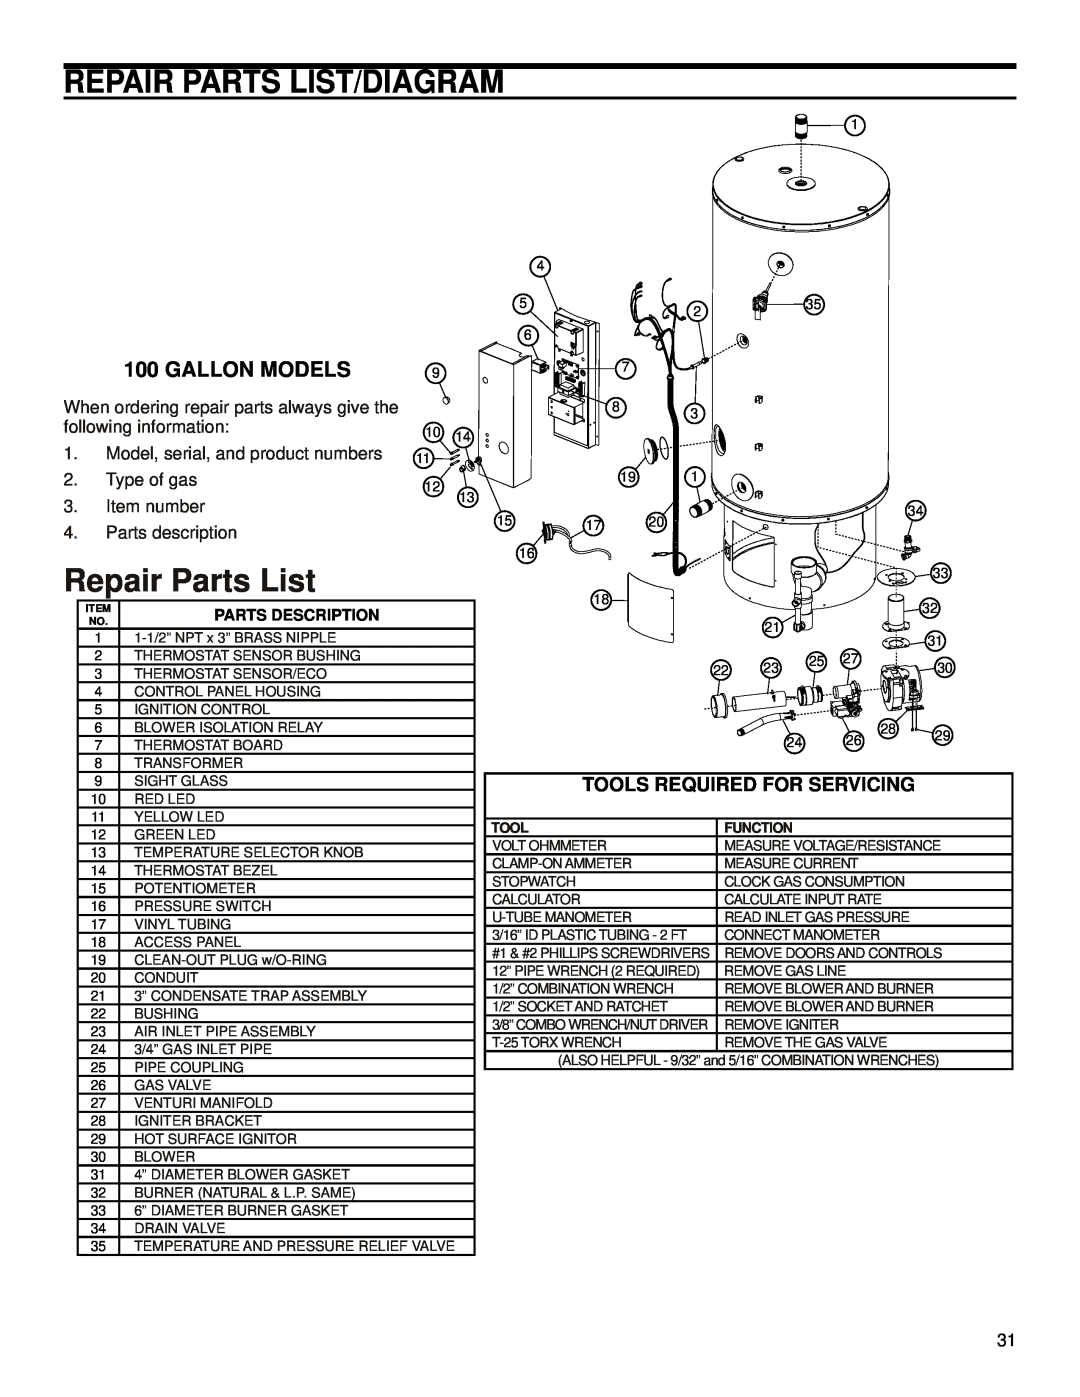 American International PG10*100-199-3NV or 3PV Gallon Models, Repair Parts List/Diagram, Tools Required For Servicing 